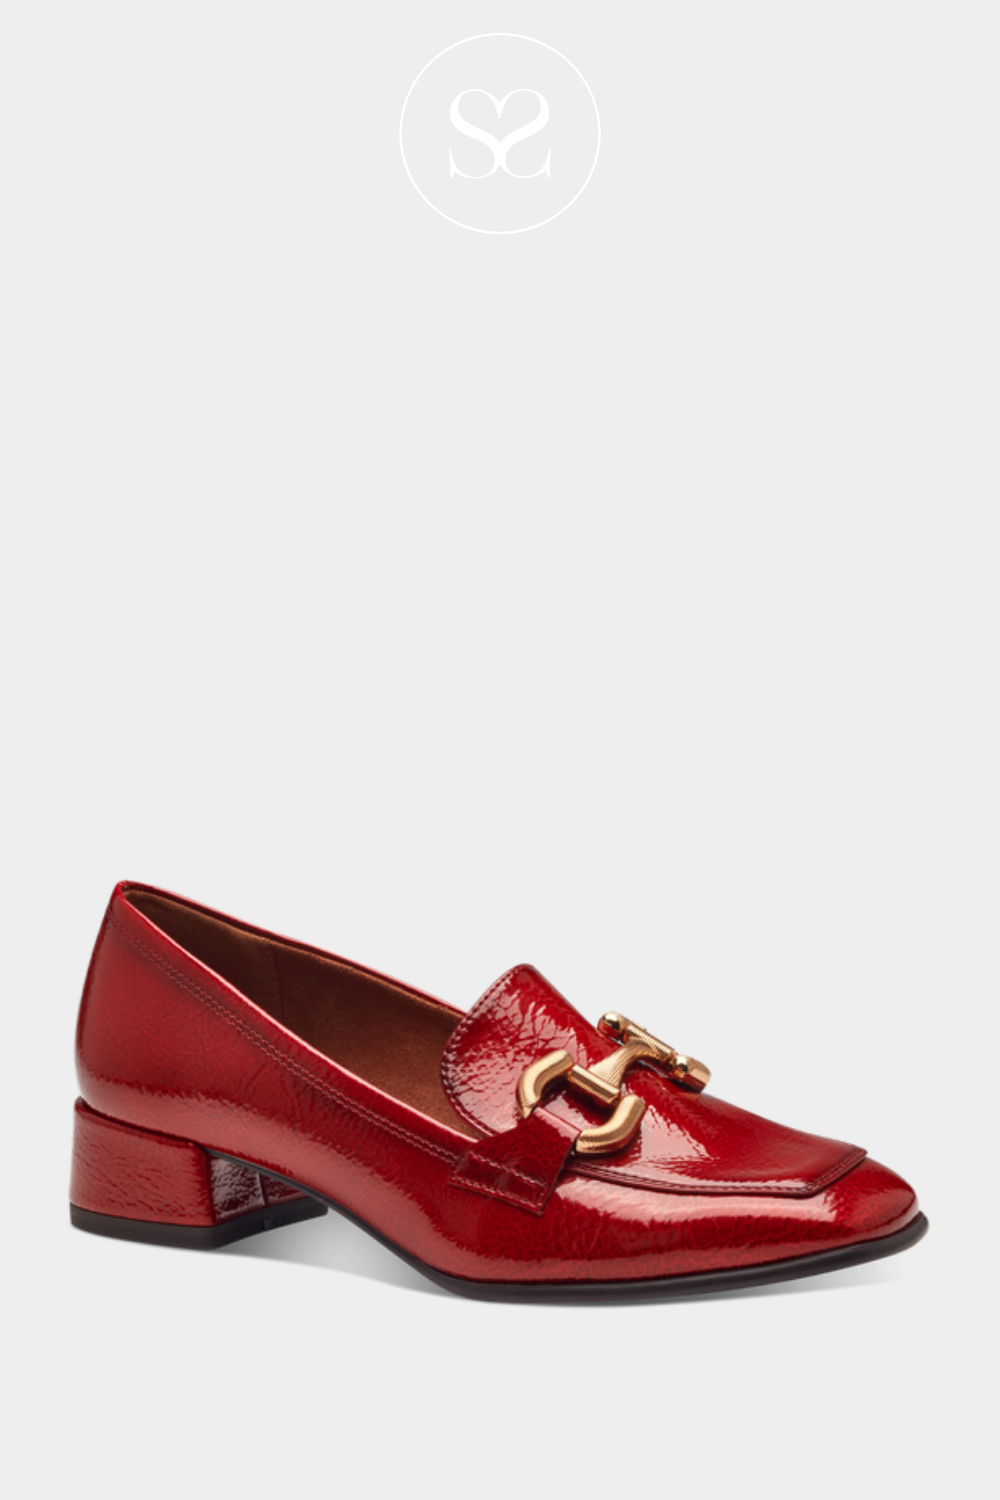 TAMARIS 24316 RED PATENT LOAFER.TAMARIS FOR SALE PURCHASE TO BUY IRELAND.